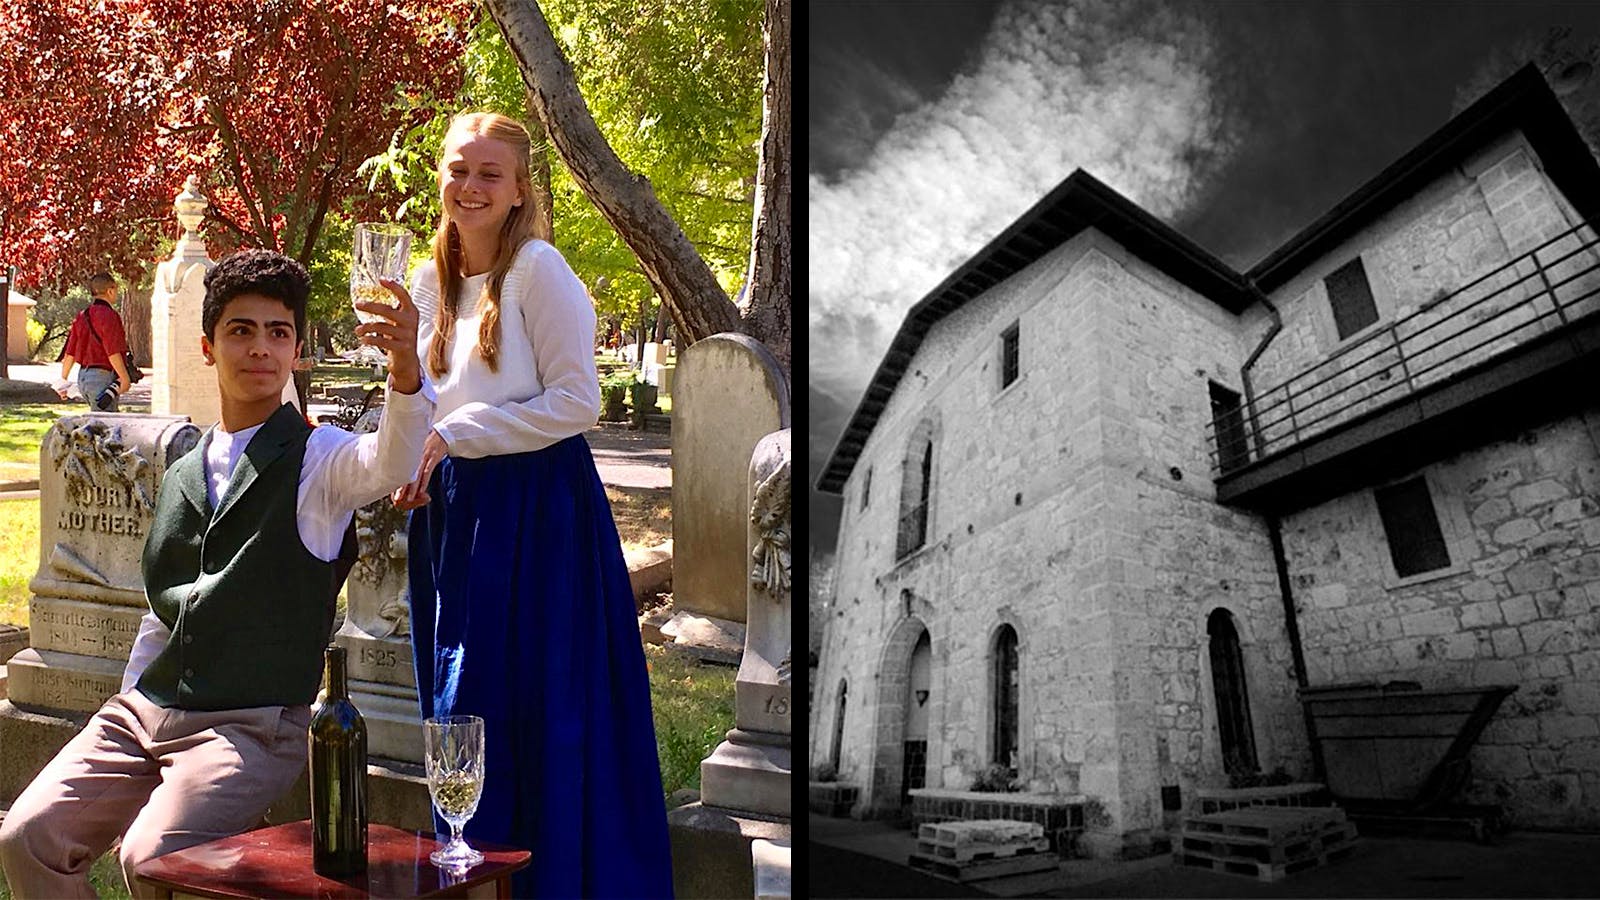 Long-Dead Napa Winemakers Come to Life in St. Helena Cemetery; Paranormal Activity at 'Ghost Winery'